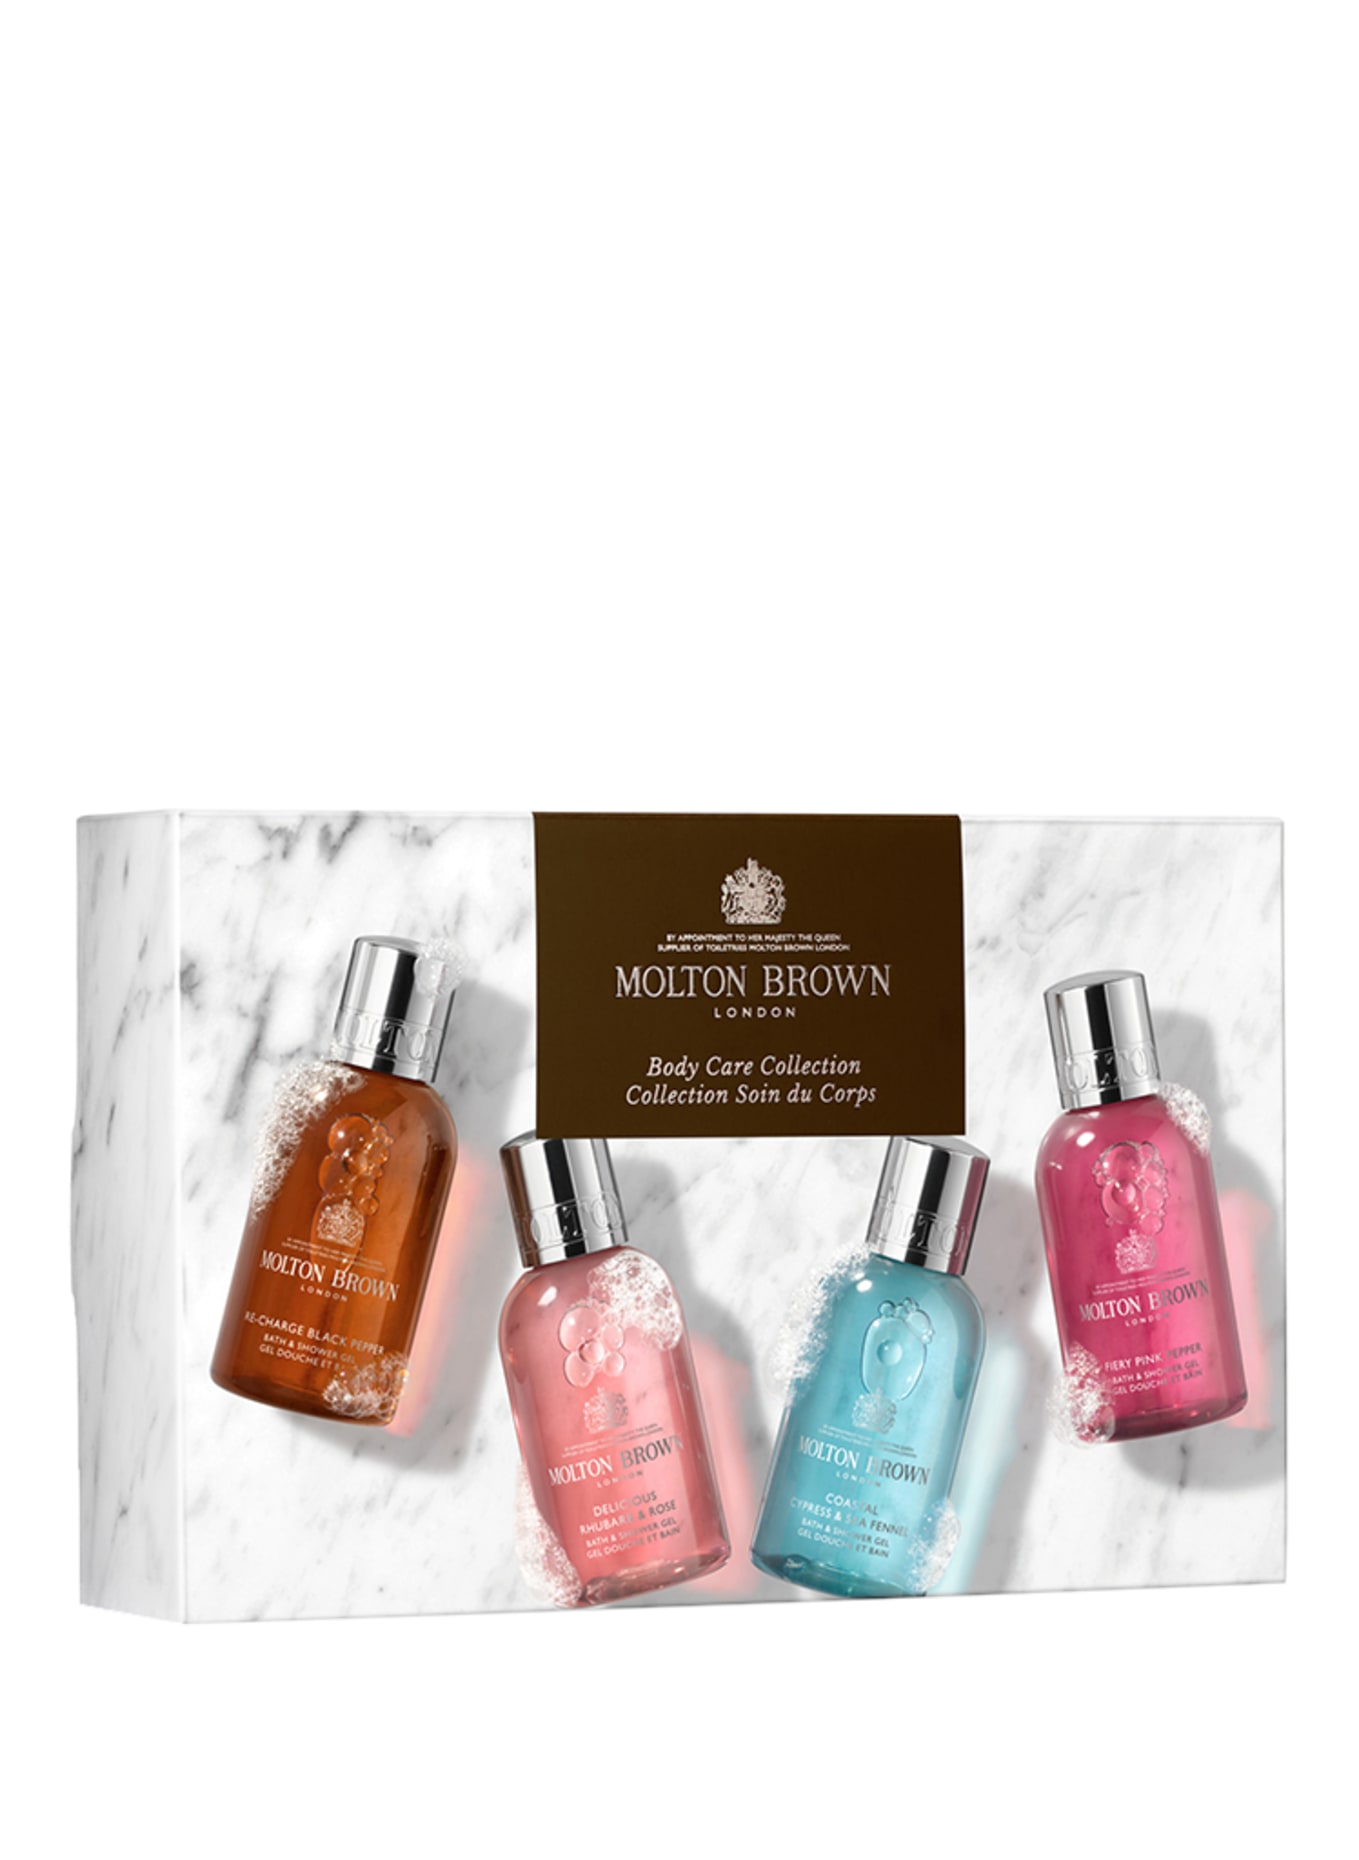 MOLTON BROWN WOODY & FLORAL BODY CARE COLLECTION (Obrázek 2)